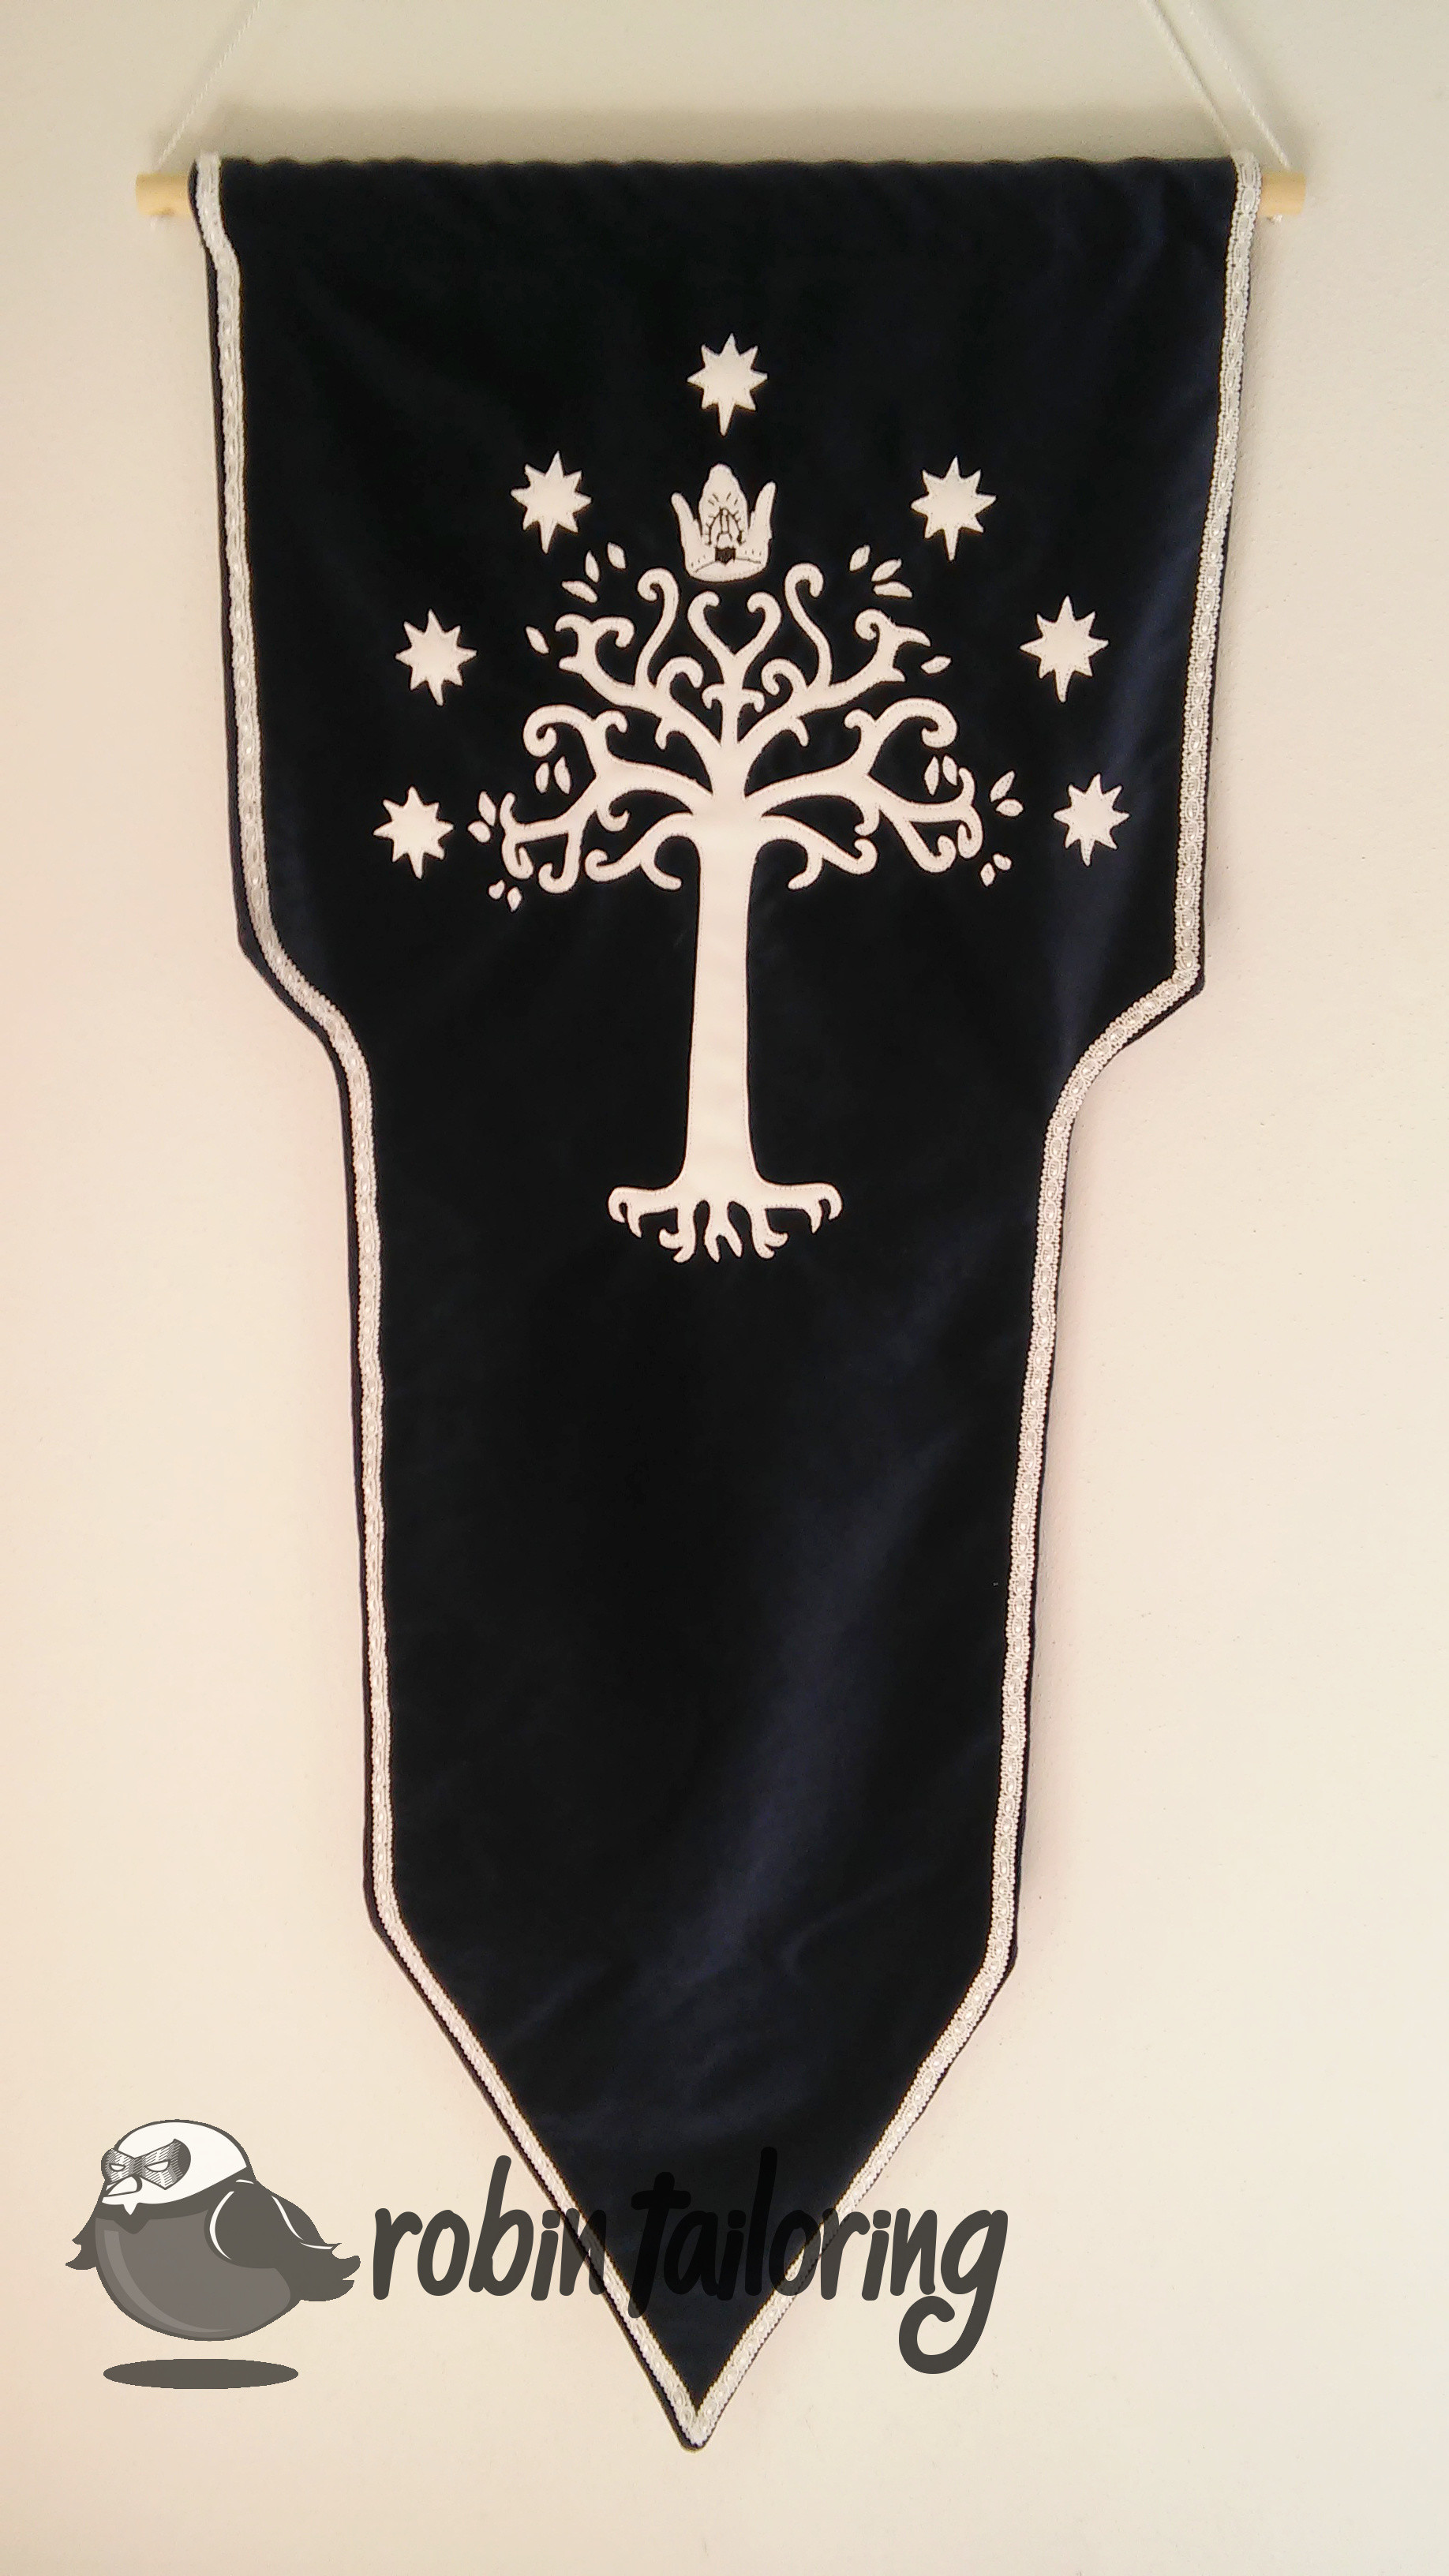 1836x3264 Amazon.com : Lord of the Rings Flag | Gondor White Tree | 3x5 Ft ...